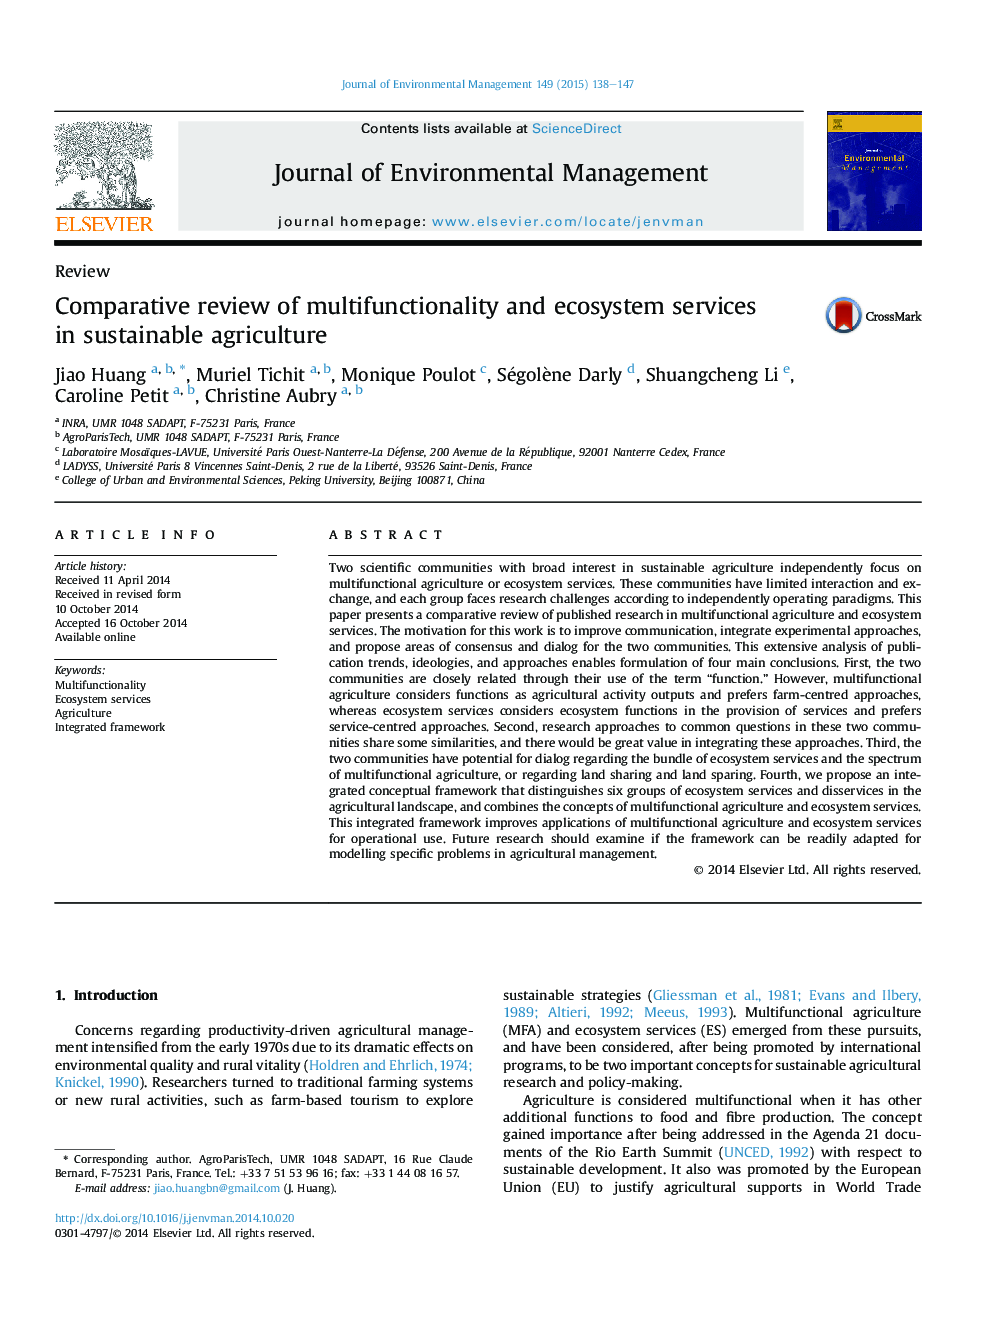 Comparative review of multifunctionality and ecosystem services in sustainable agriculture